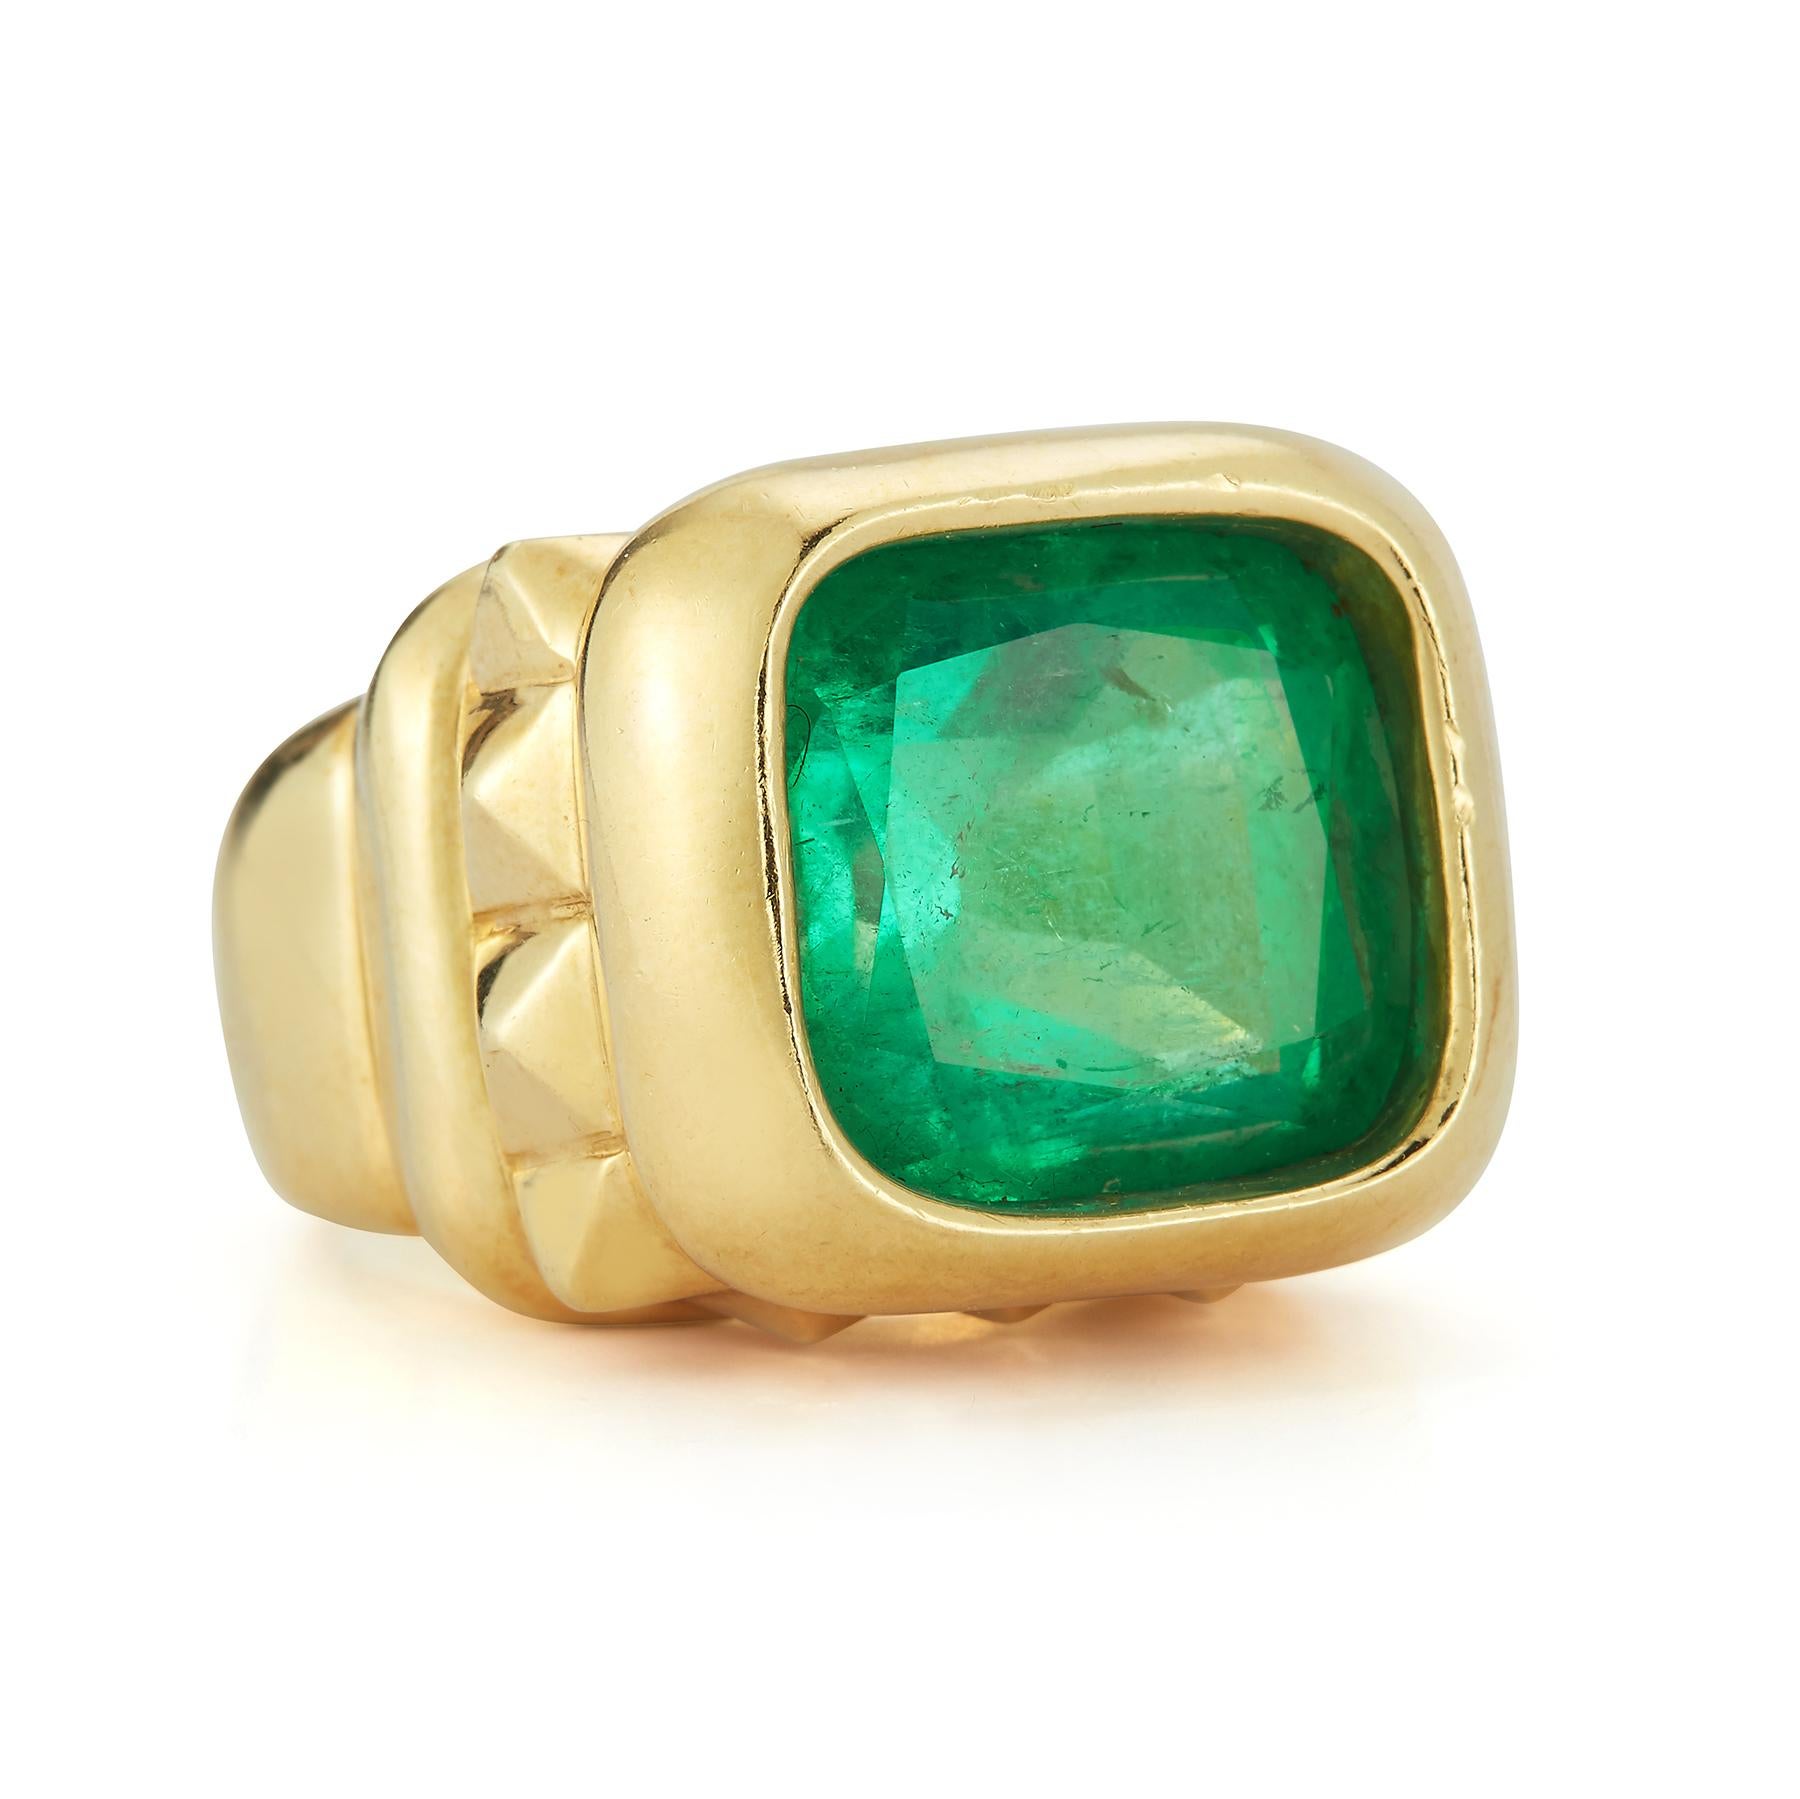 Men's Emerald & Gold Ring, 1 cushion cut emerald approximately 25.00 cts set in 18k yellow gold.

Ring Size: 11.25

Re sizable to most sizes free of charge

Gram Weight: 43.5 Grams


